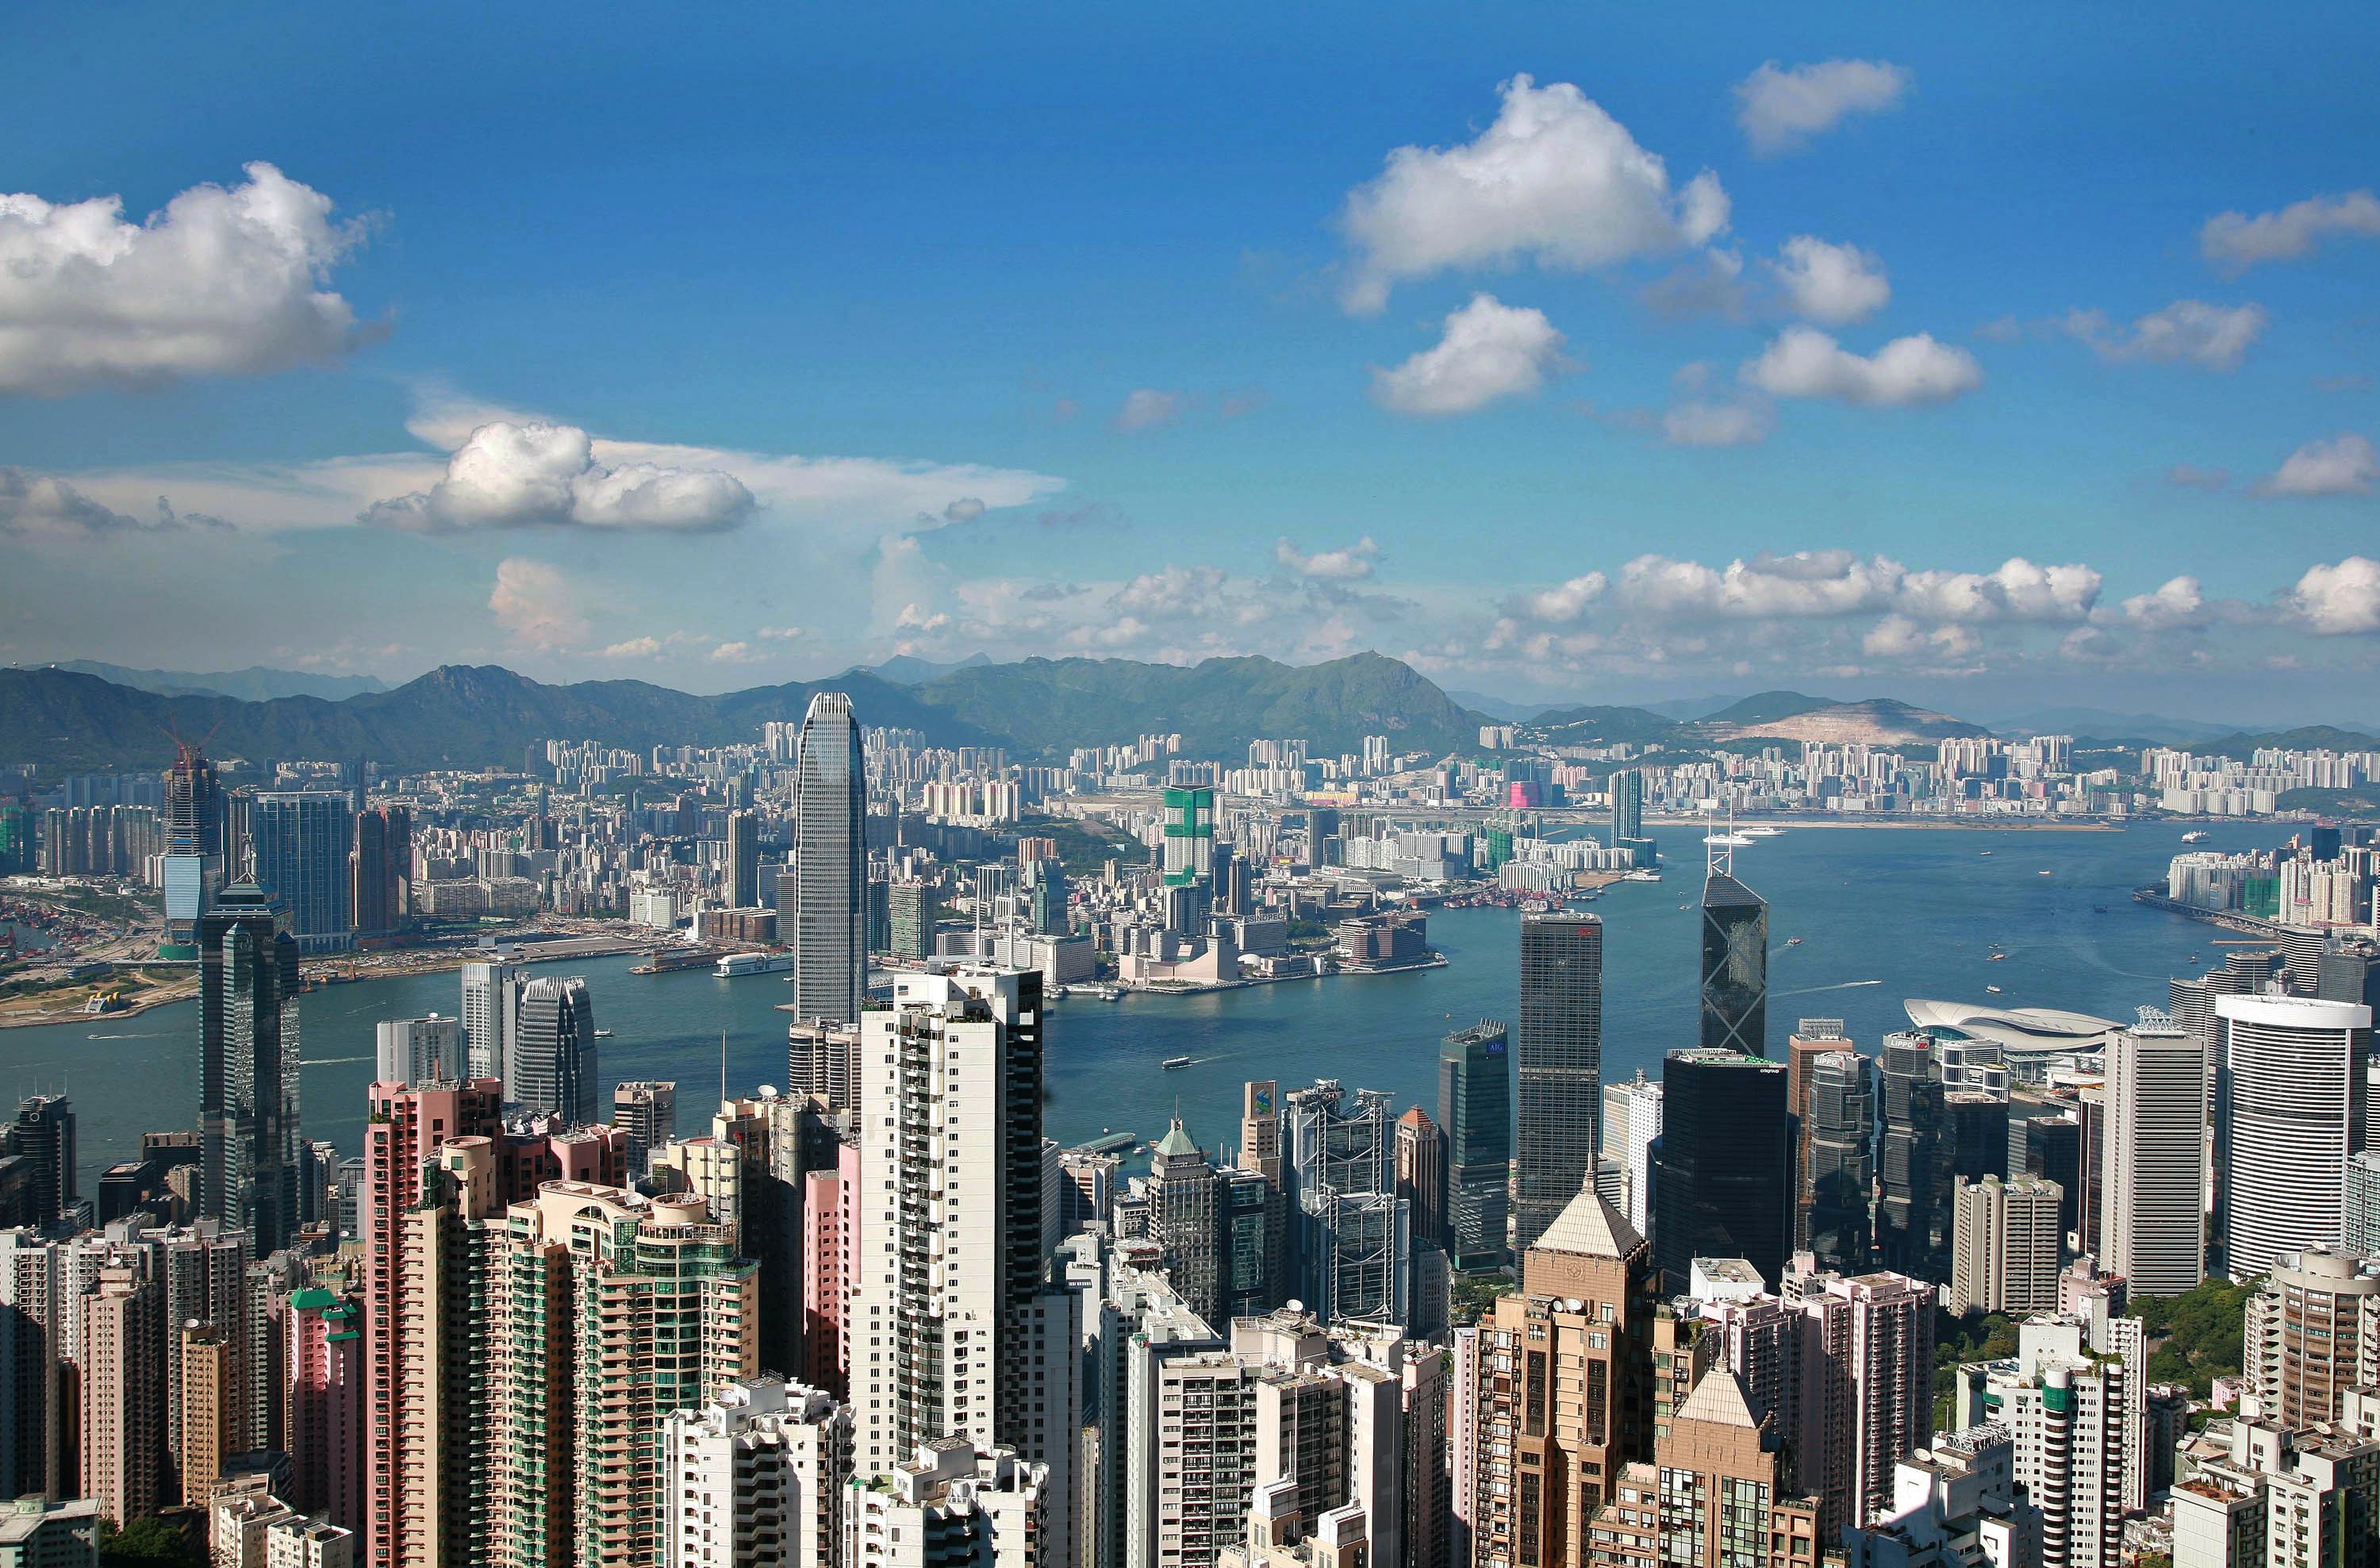 A view of Hong Kong’s skyline from The Peak on 3 August 2007. Photo: AFP.